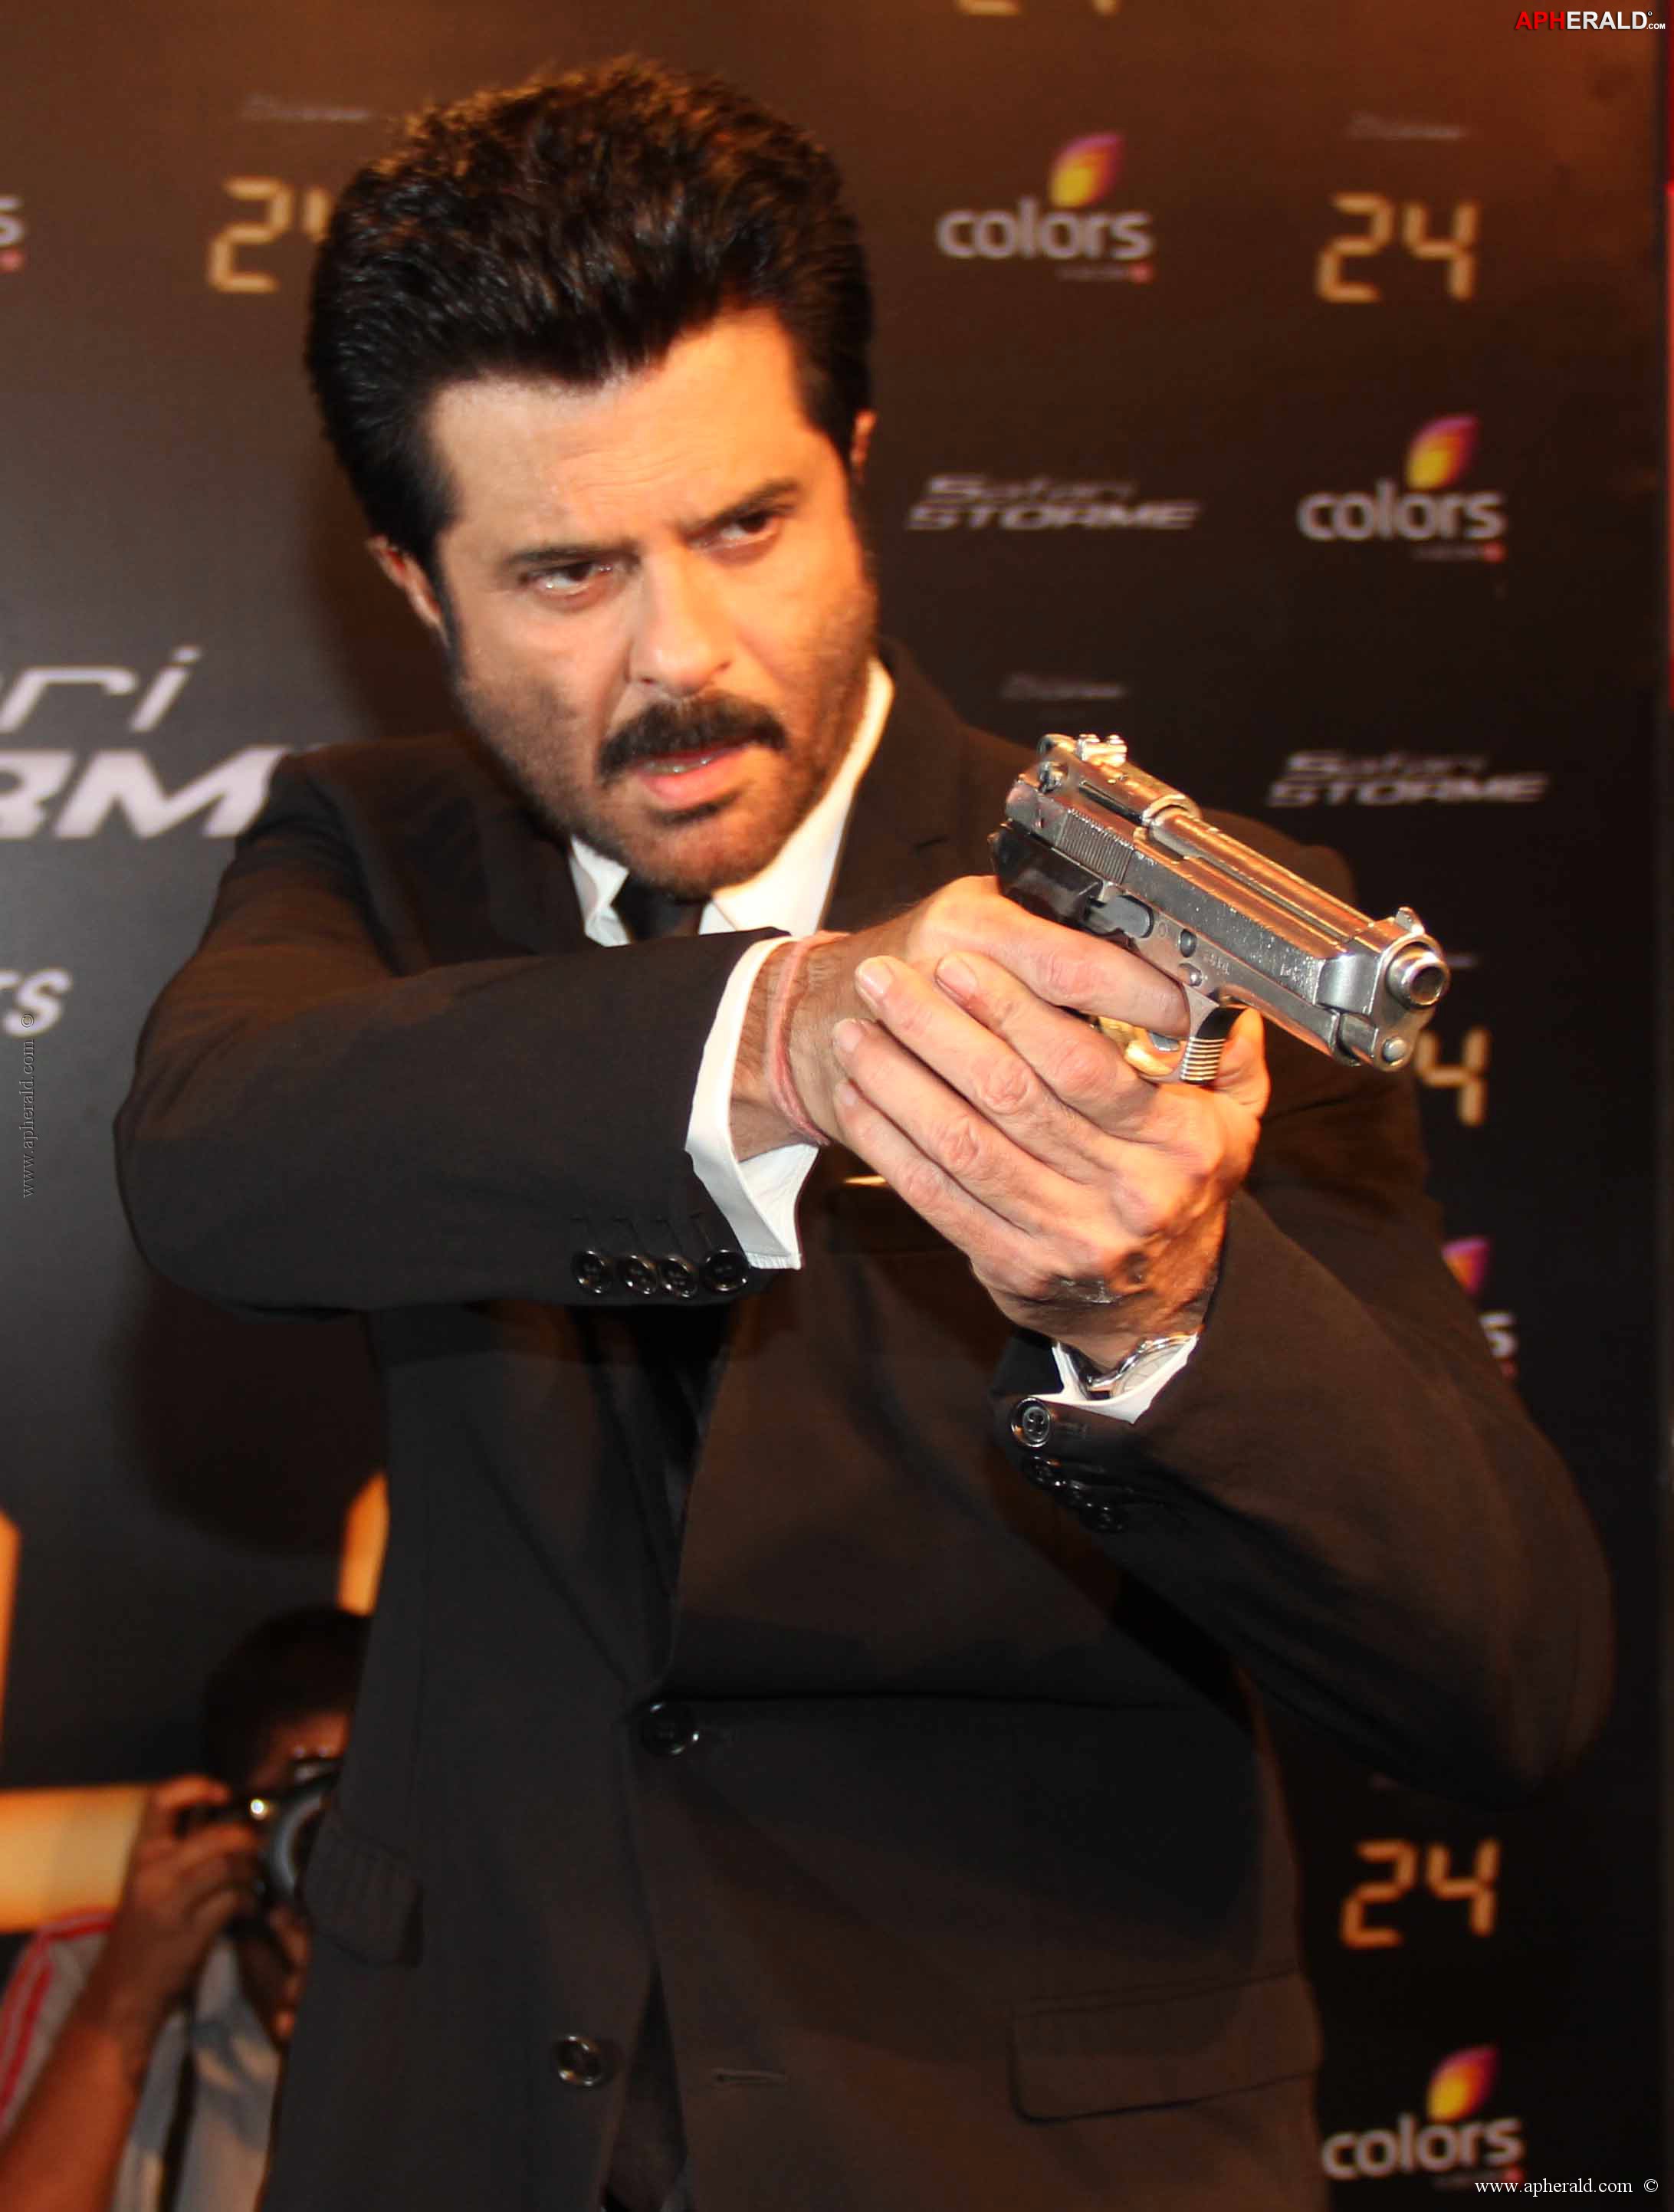 Anil Kapoor's 24 Television Series Launch